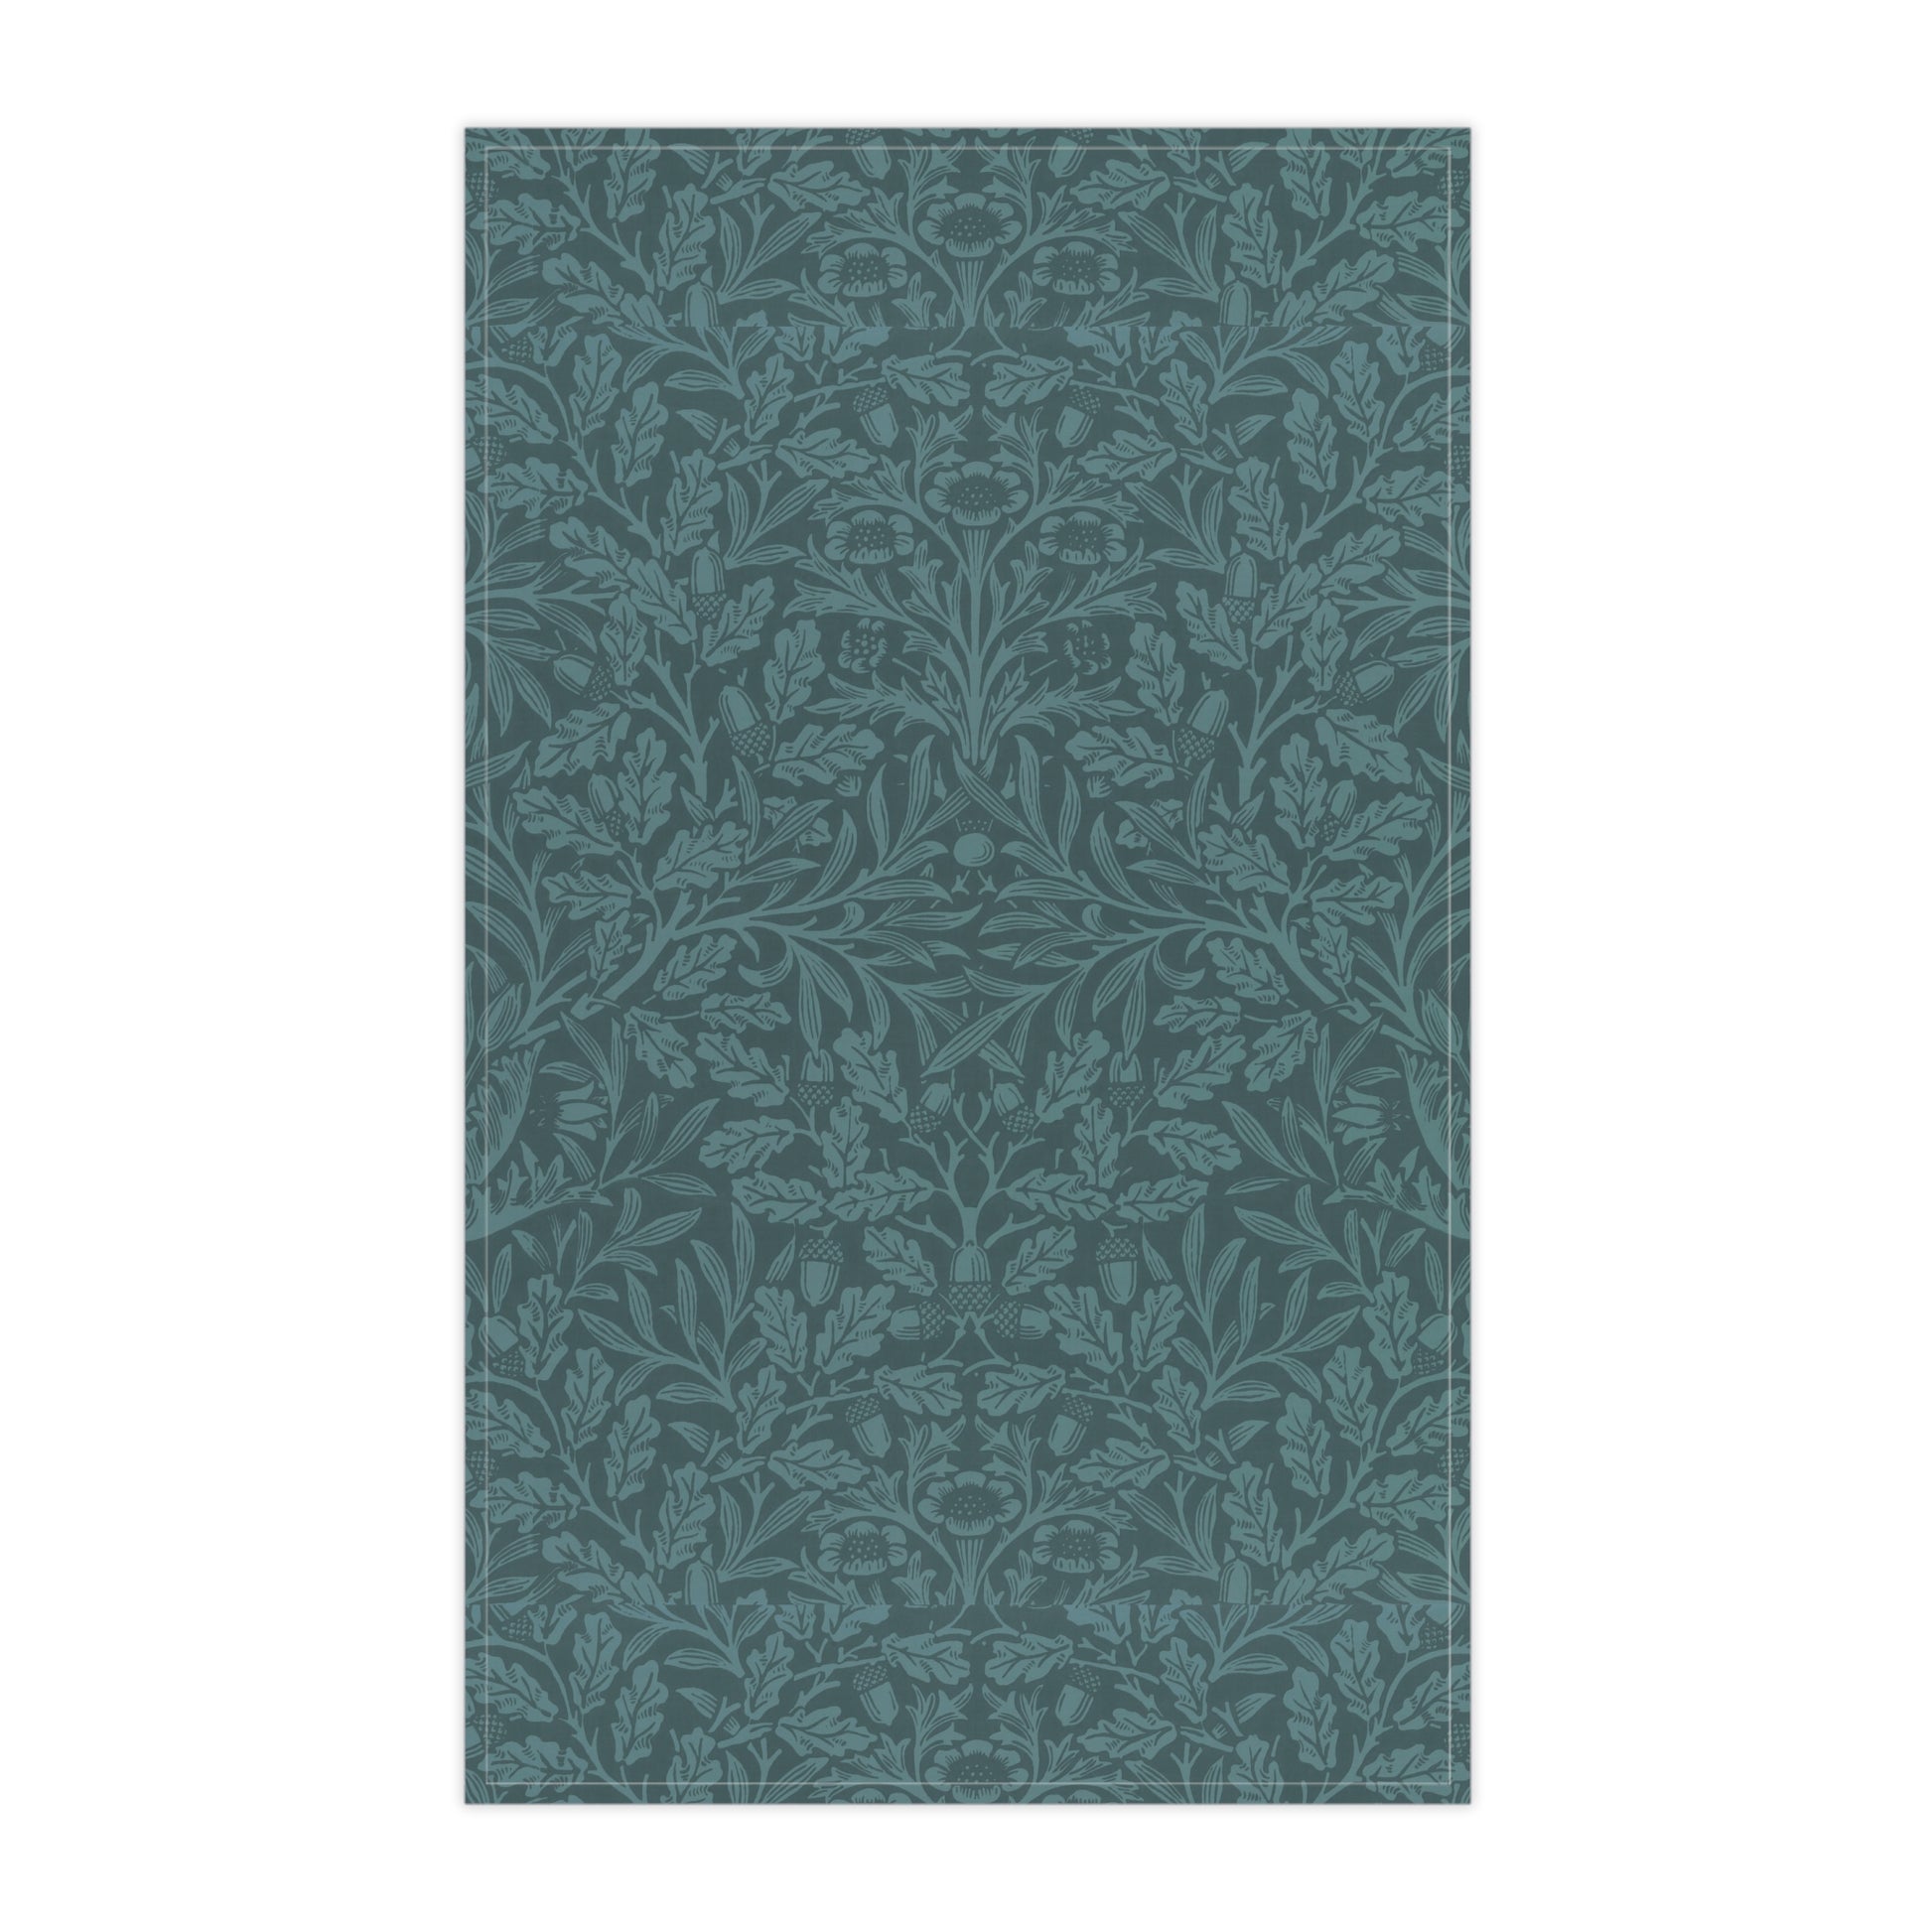 william-morris-co-kitchen-tea-towel-acorn-and-oak-leaves-collection-teal-3